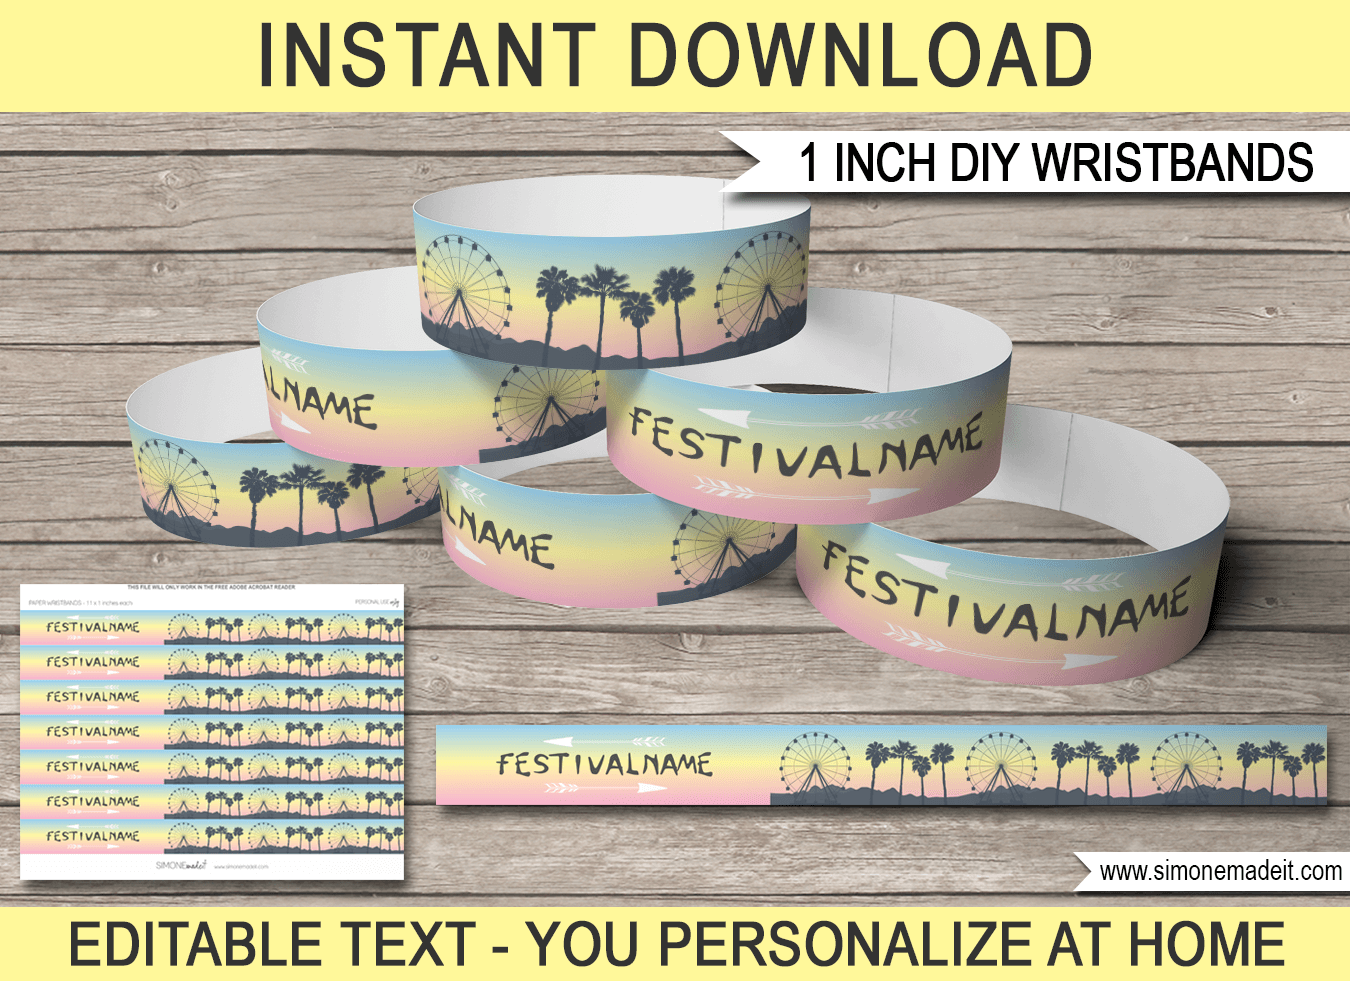 Printable Festival Themed Party Wristbands | Kidchella, Fauxchella, Music Festival, Fete, Gala, Fair, Carnival | Party Decorations | Festival Inspired Birthday Party | Editable DIY Template | Instant Download via SIMONEmadeit.com